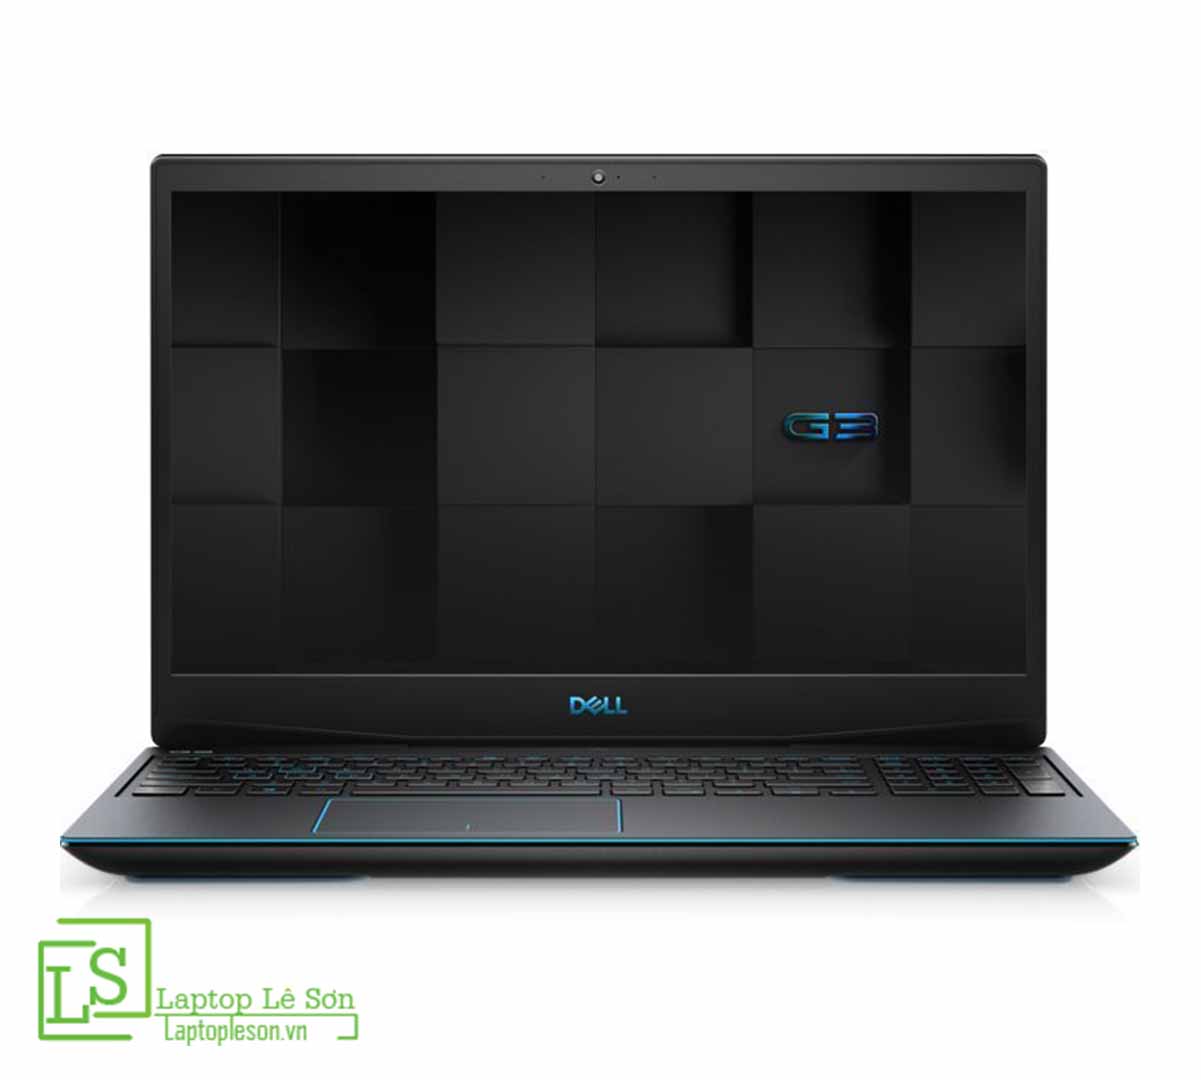 Dell G3 15 Gaming Laptop - Laptopleson 04